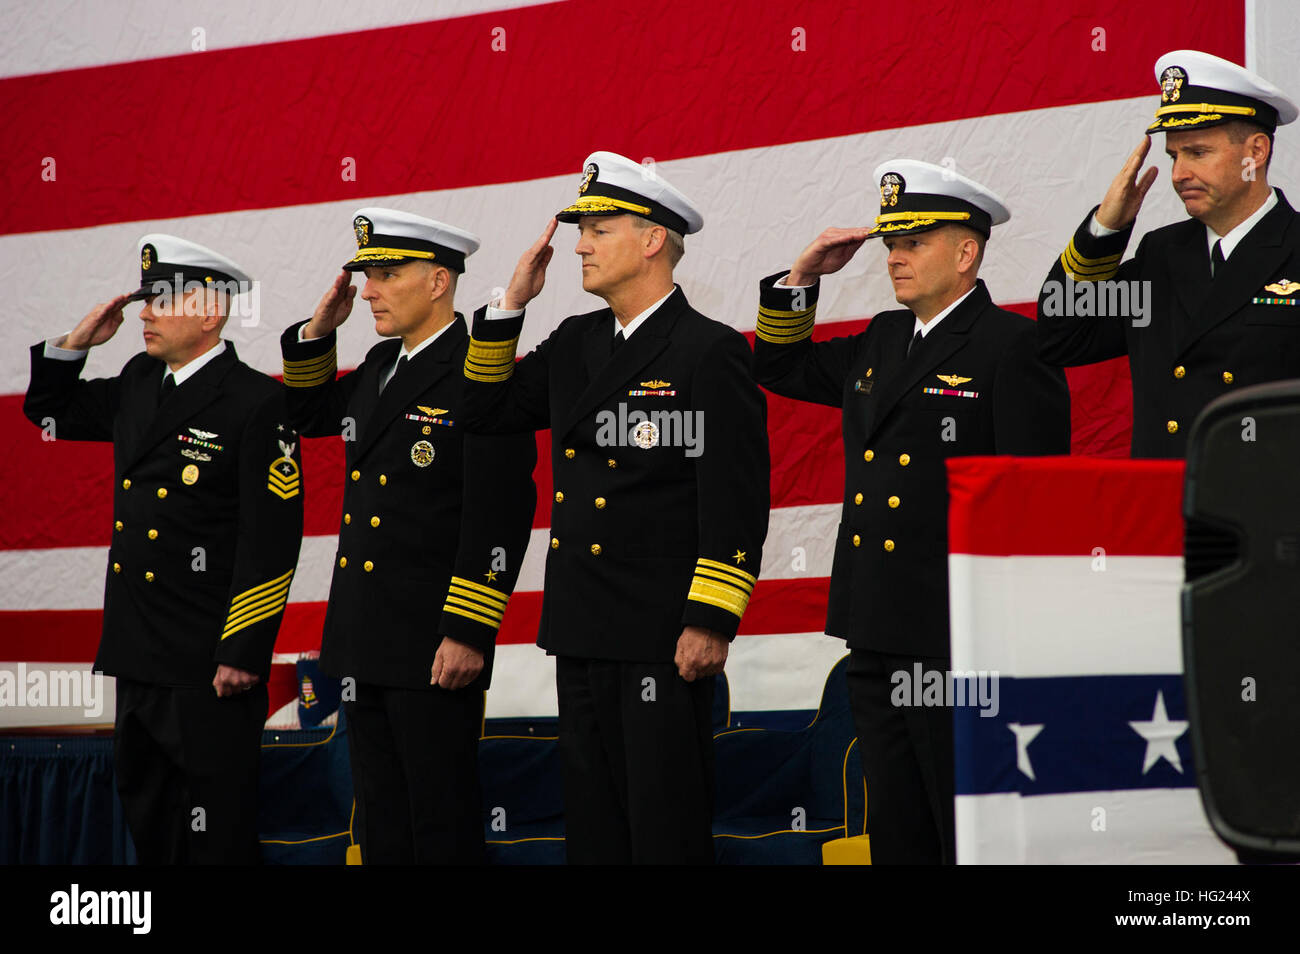 (From left to right) The Nimitz-class aircraft carrier USS George Washington's (CVN 73) Command Master Chief Jason Haka, Capt. Timothy Kuehhas, George Washington's prospective commanding officer, Vice Adm. Robert Thomas, commander, U.S. 7th Fleet, Capt. Greg Fenton, George Washington's commanding officer, and Cmdr. Joseph Coffey, George Washington's command chaplain, salute as color guard presents colors during a change of command ceremony in the ship's hangar bay. Kuehhas relieved Fenton as George Washington's commanding officer. George Washington and its embarked air wing, Carrier Air Wing ( Stock Photo